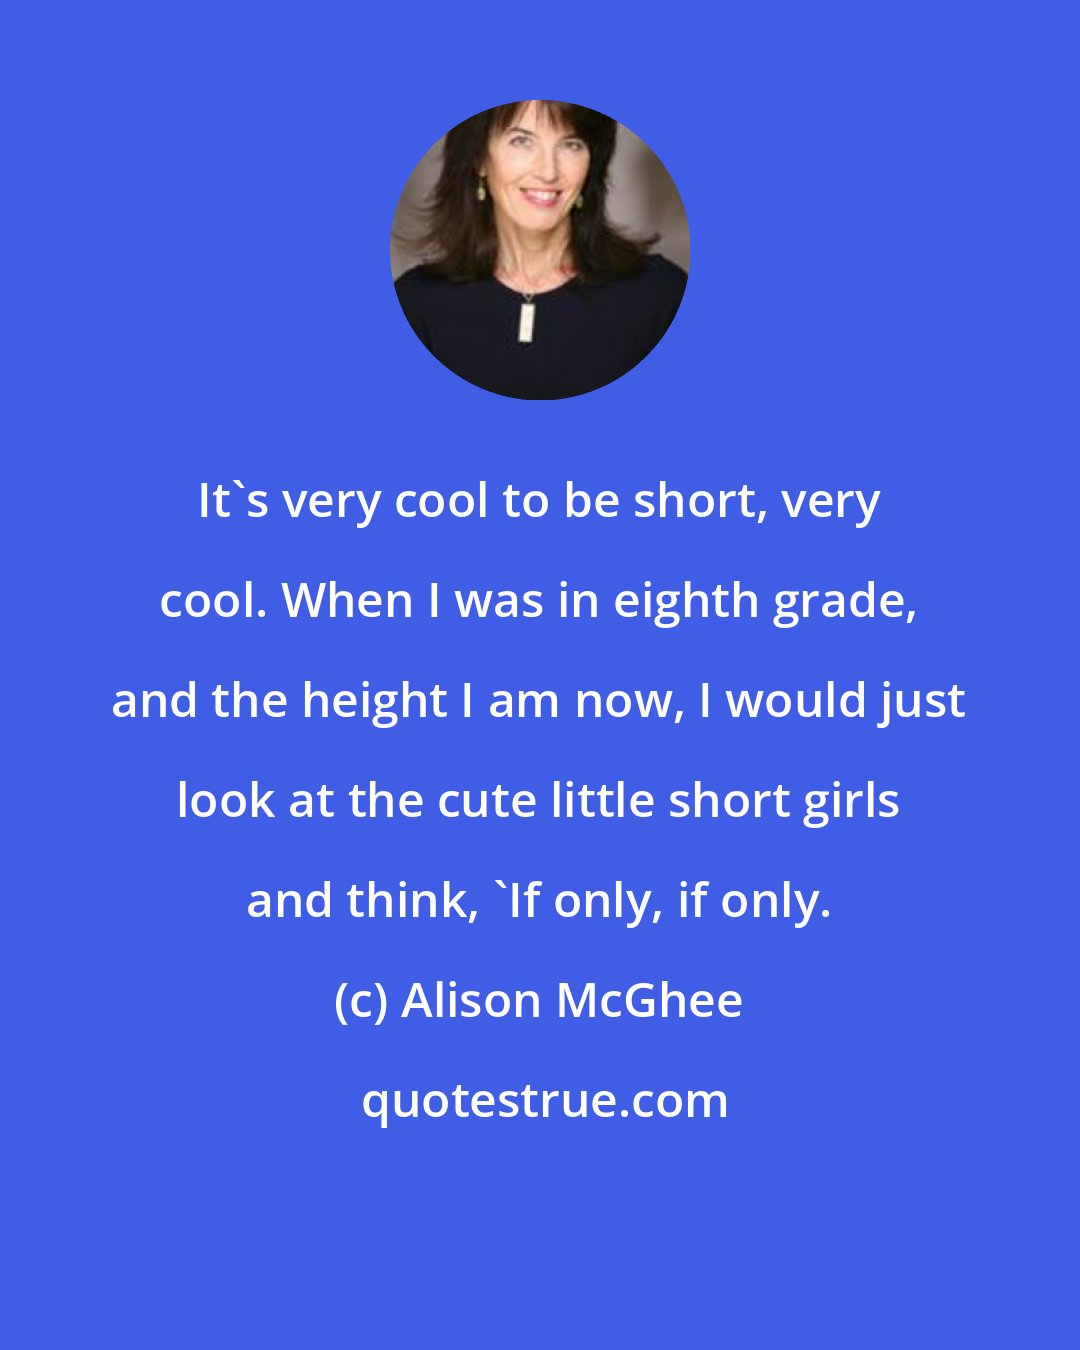 Alison McGhee: It's very cool to be short, very cool. When I was in eighth grade, and the height I am now, I would just look at the cute little short girls and think, 'If only, if only.